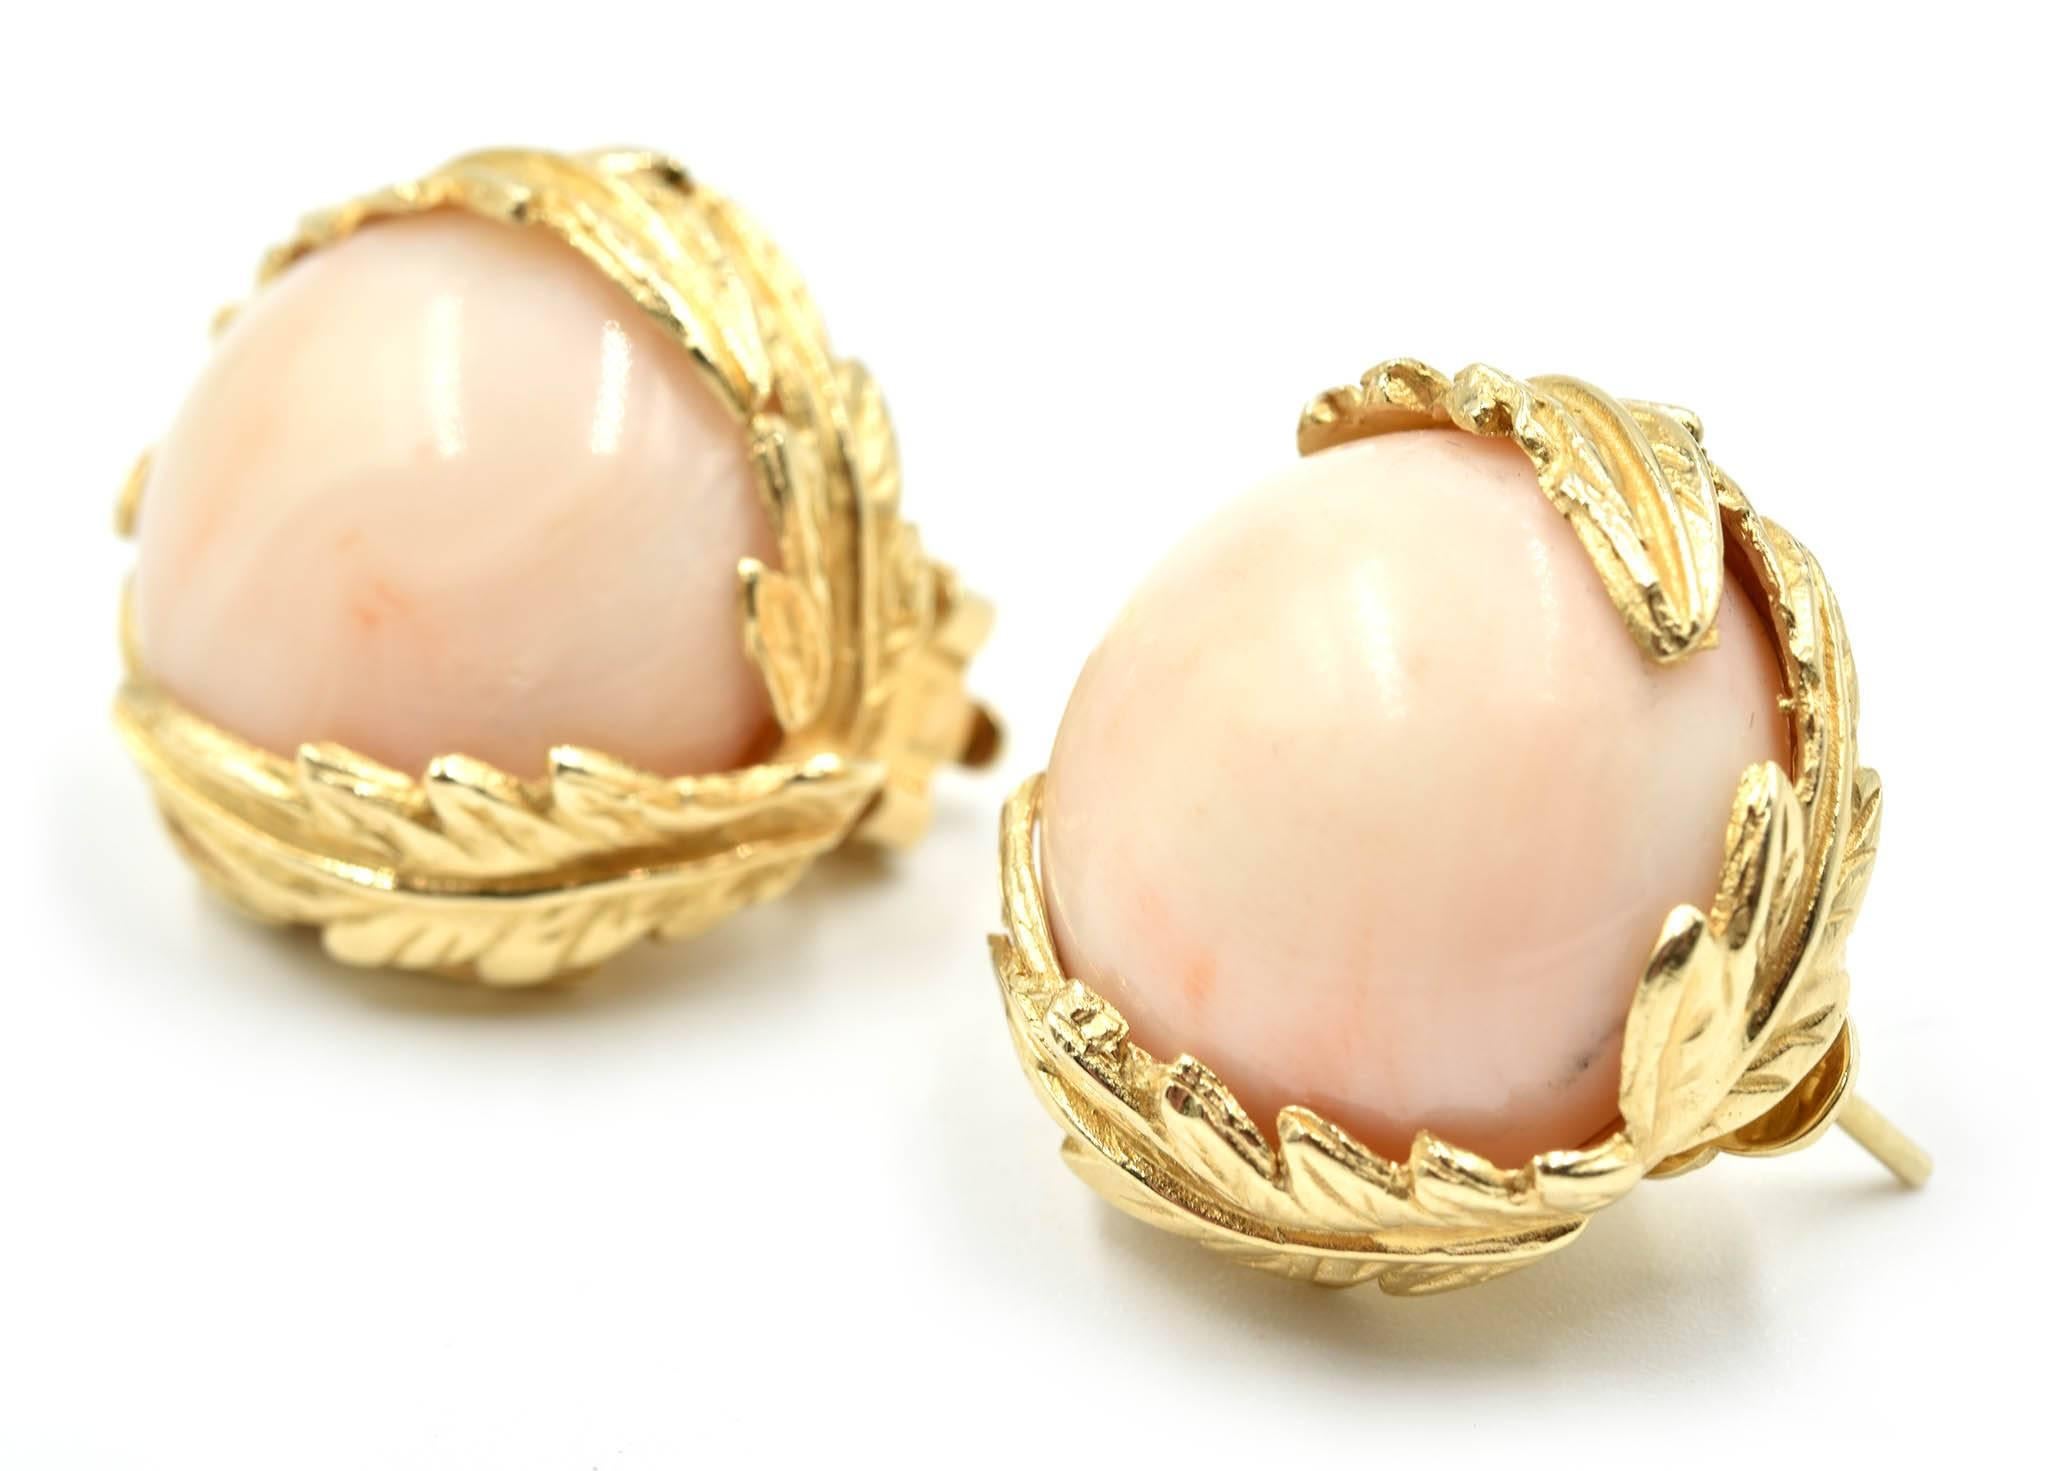 Designer: custom design
Material: 14k yellow gold
Coral: two semi round 18mm angel skin coral
Dimensions: each earring measures approximately 3/4th an inch long and ½ an inch wide
Fastenings: omega backs
Weight: 18.00 grams
